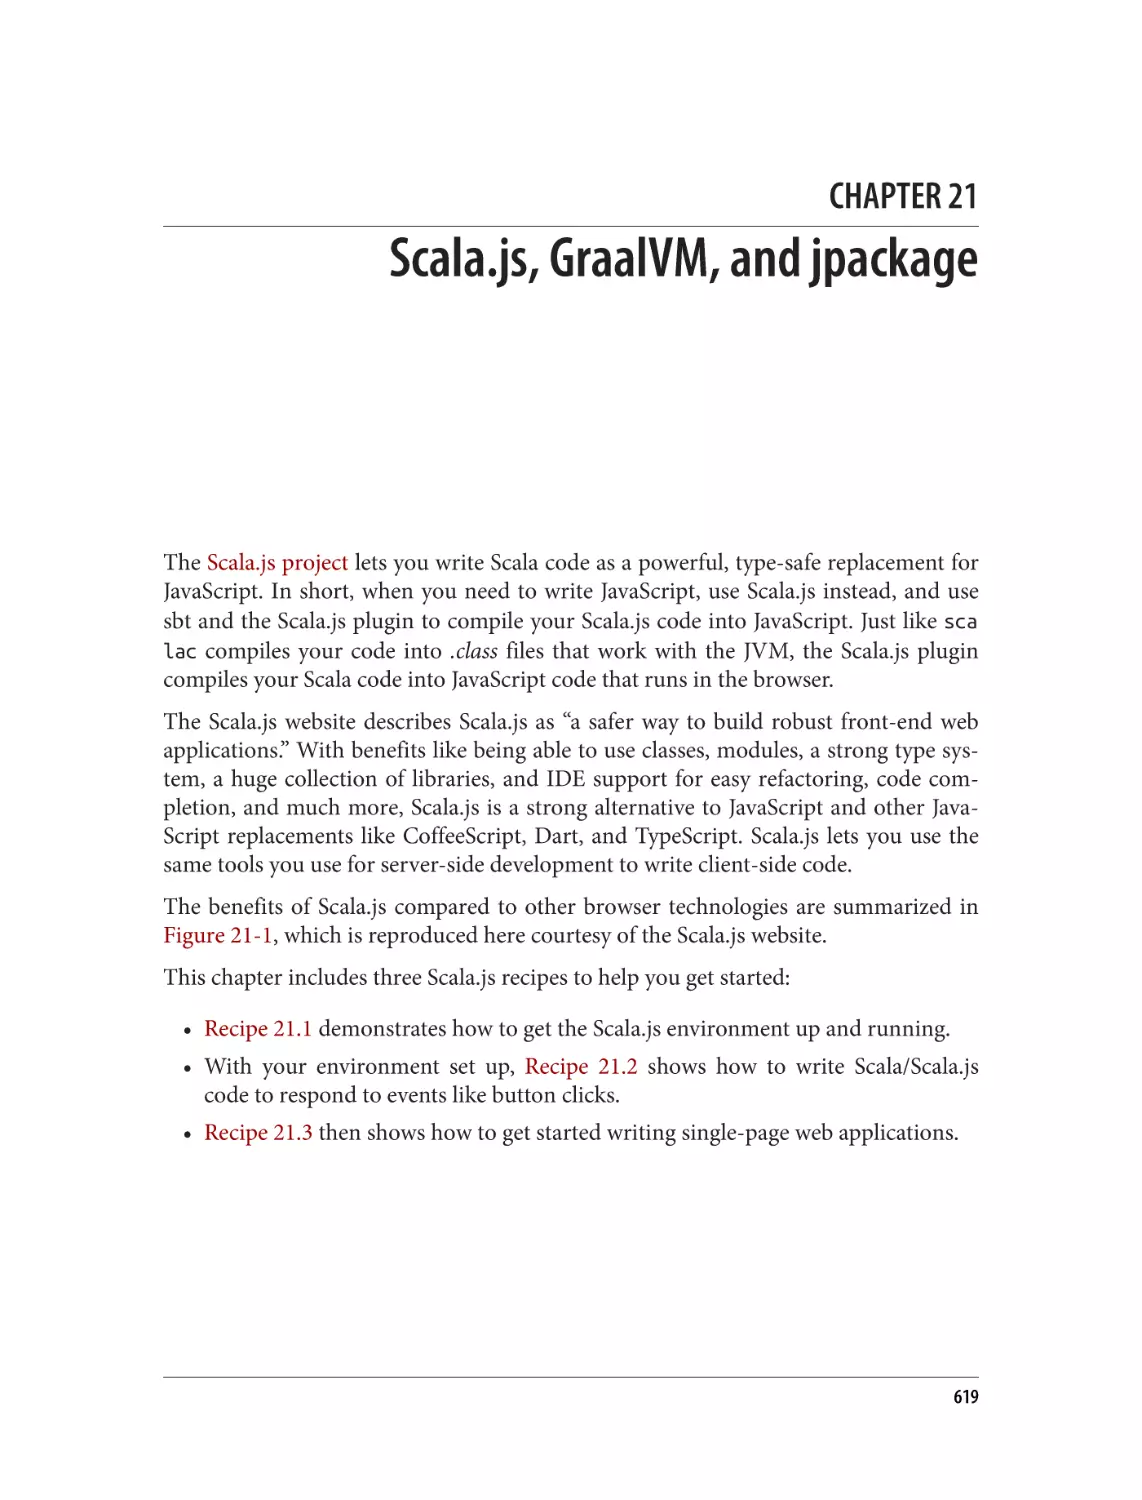 Chapter 21. Scala.js, GraalVM, and jpackage